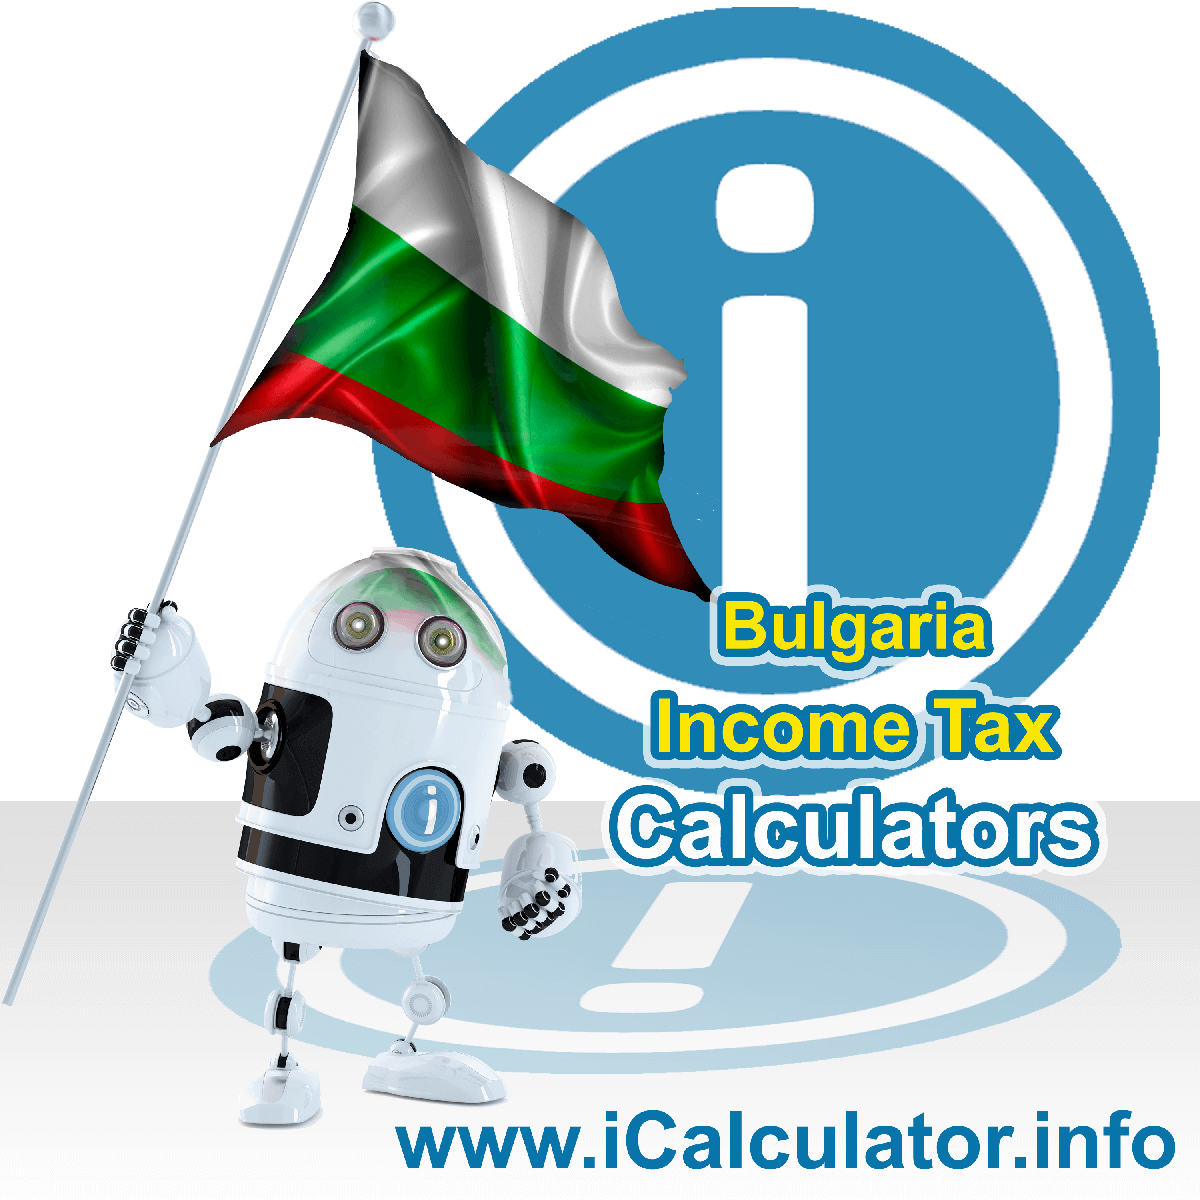 Bulgaria Income Tax Calculator. This image shows a new employer in Bulgaria calculating the annual payroll costs based on multiple payroll payments in one year in Bulgaria using the Bulgaria income tax calculator to understand their payroll costs in Bulgaria in 2022